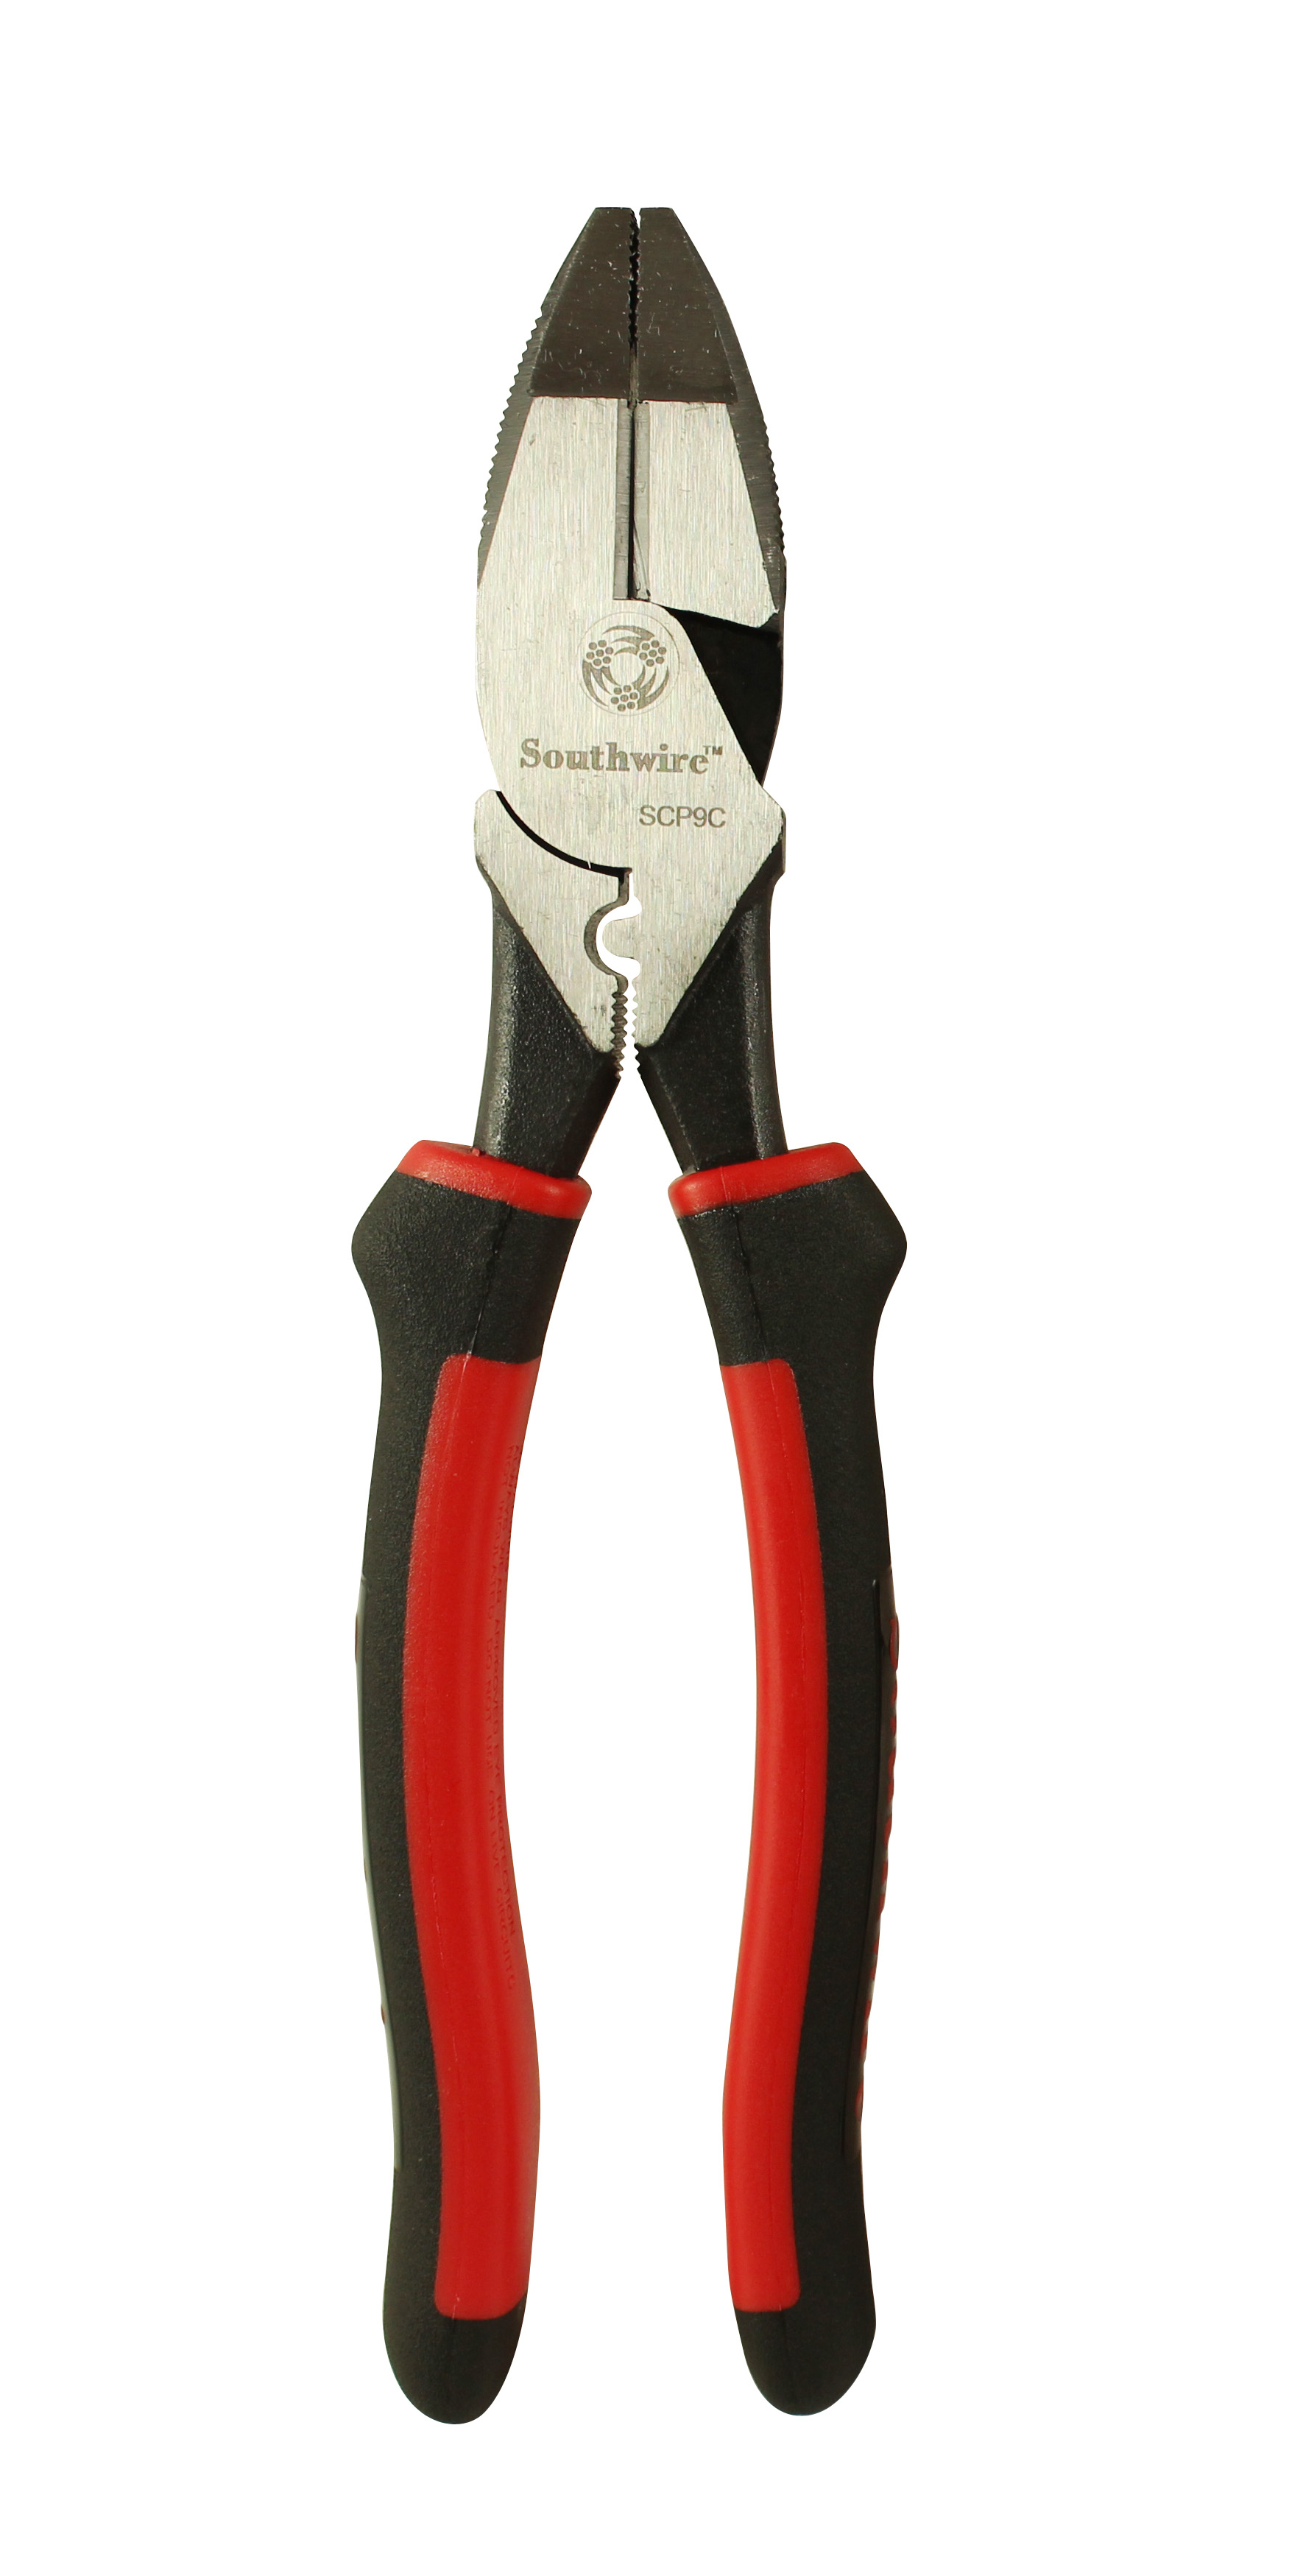 Made from drop forged steel, these durable high-leverage side cutting pliers built for work. The dual material grip provide a comfortable feel, while the case hardened cutting blades cut wire and cable with ease. These pliers feature a crimping die b...